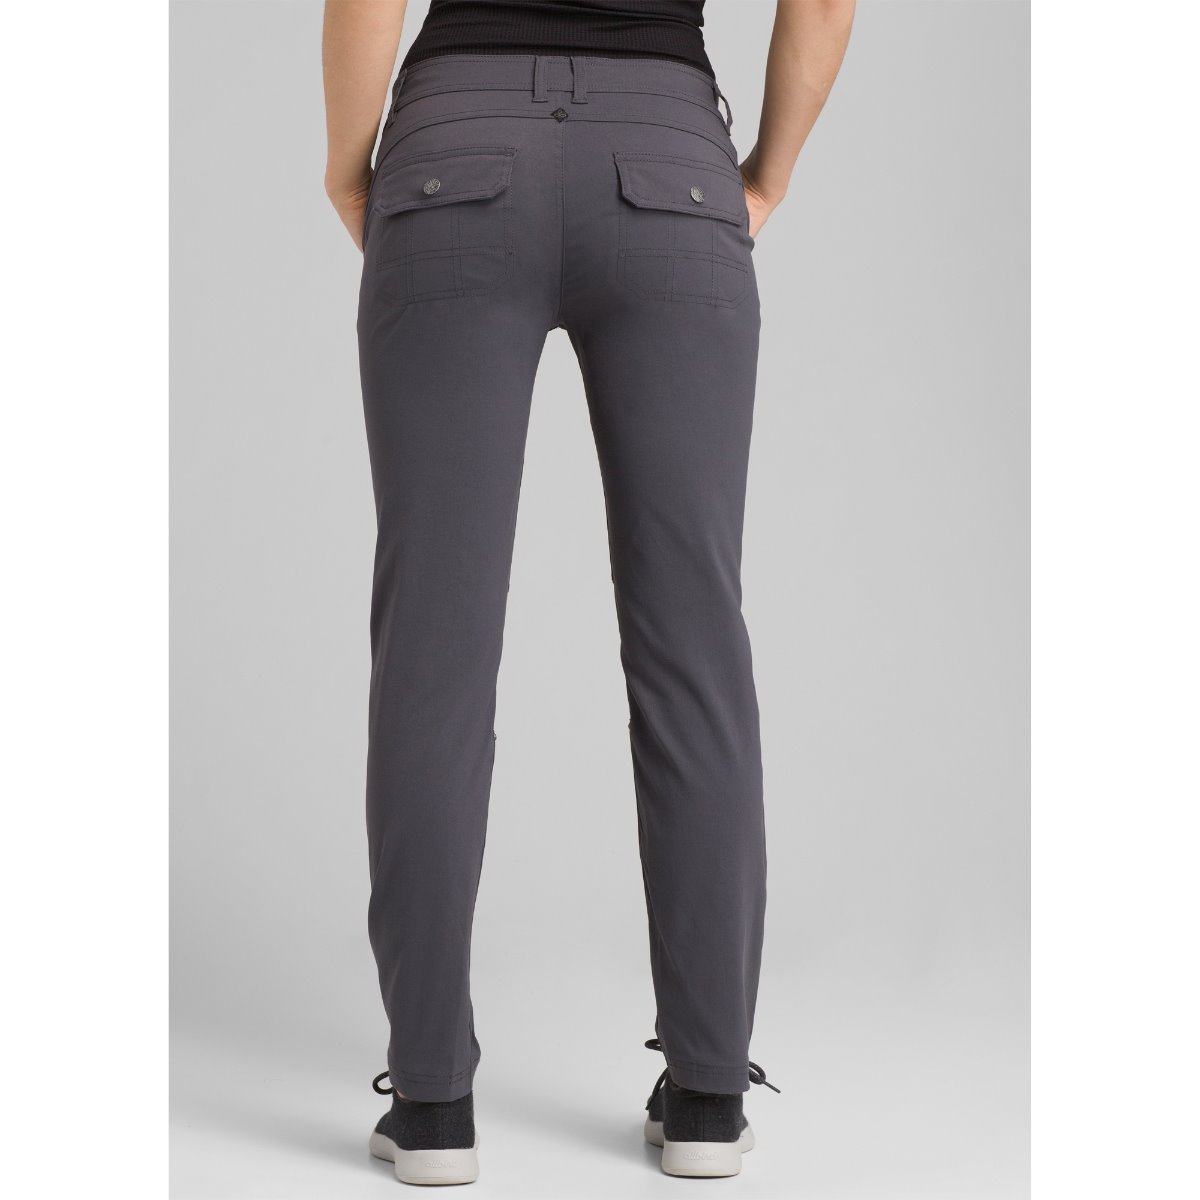 Halle Straight Pant - Women's (Fall 2021)